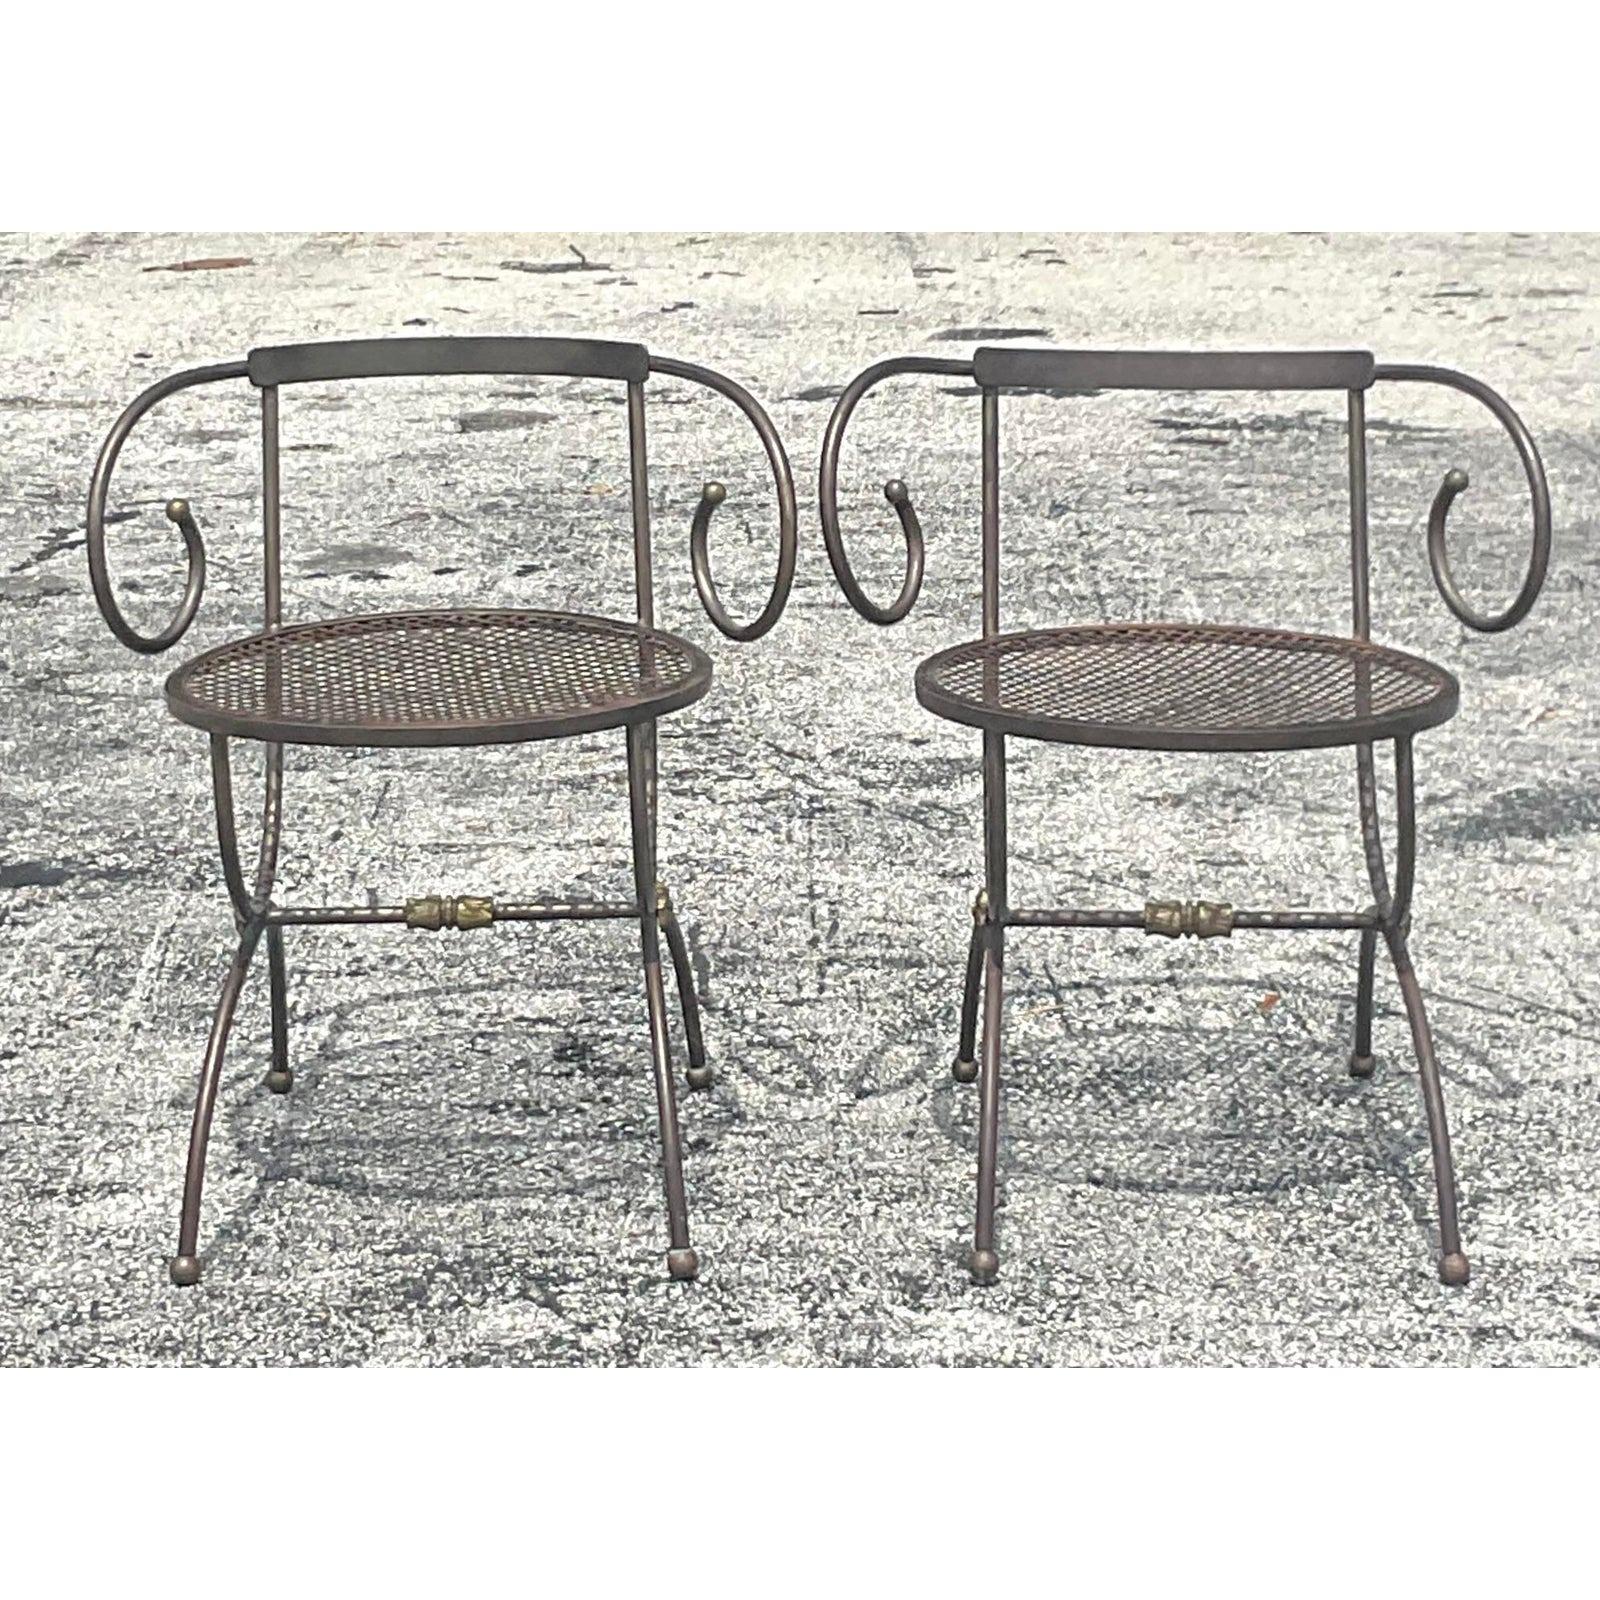 Vintage Boho Swirl Wrought Iron Accent Chairs - a Pair For Sale 2